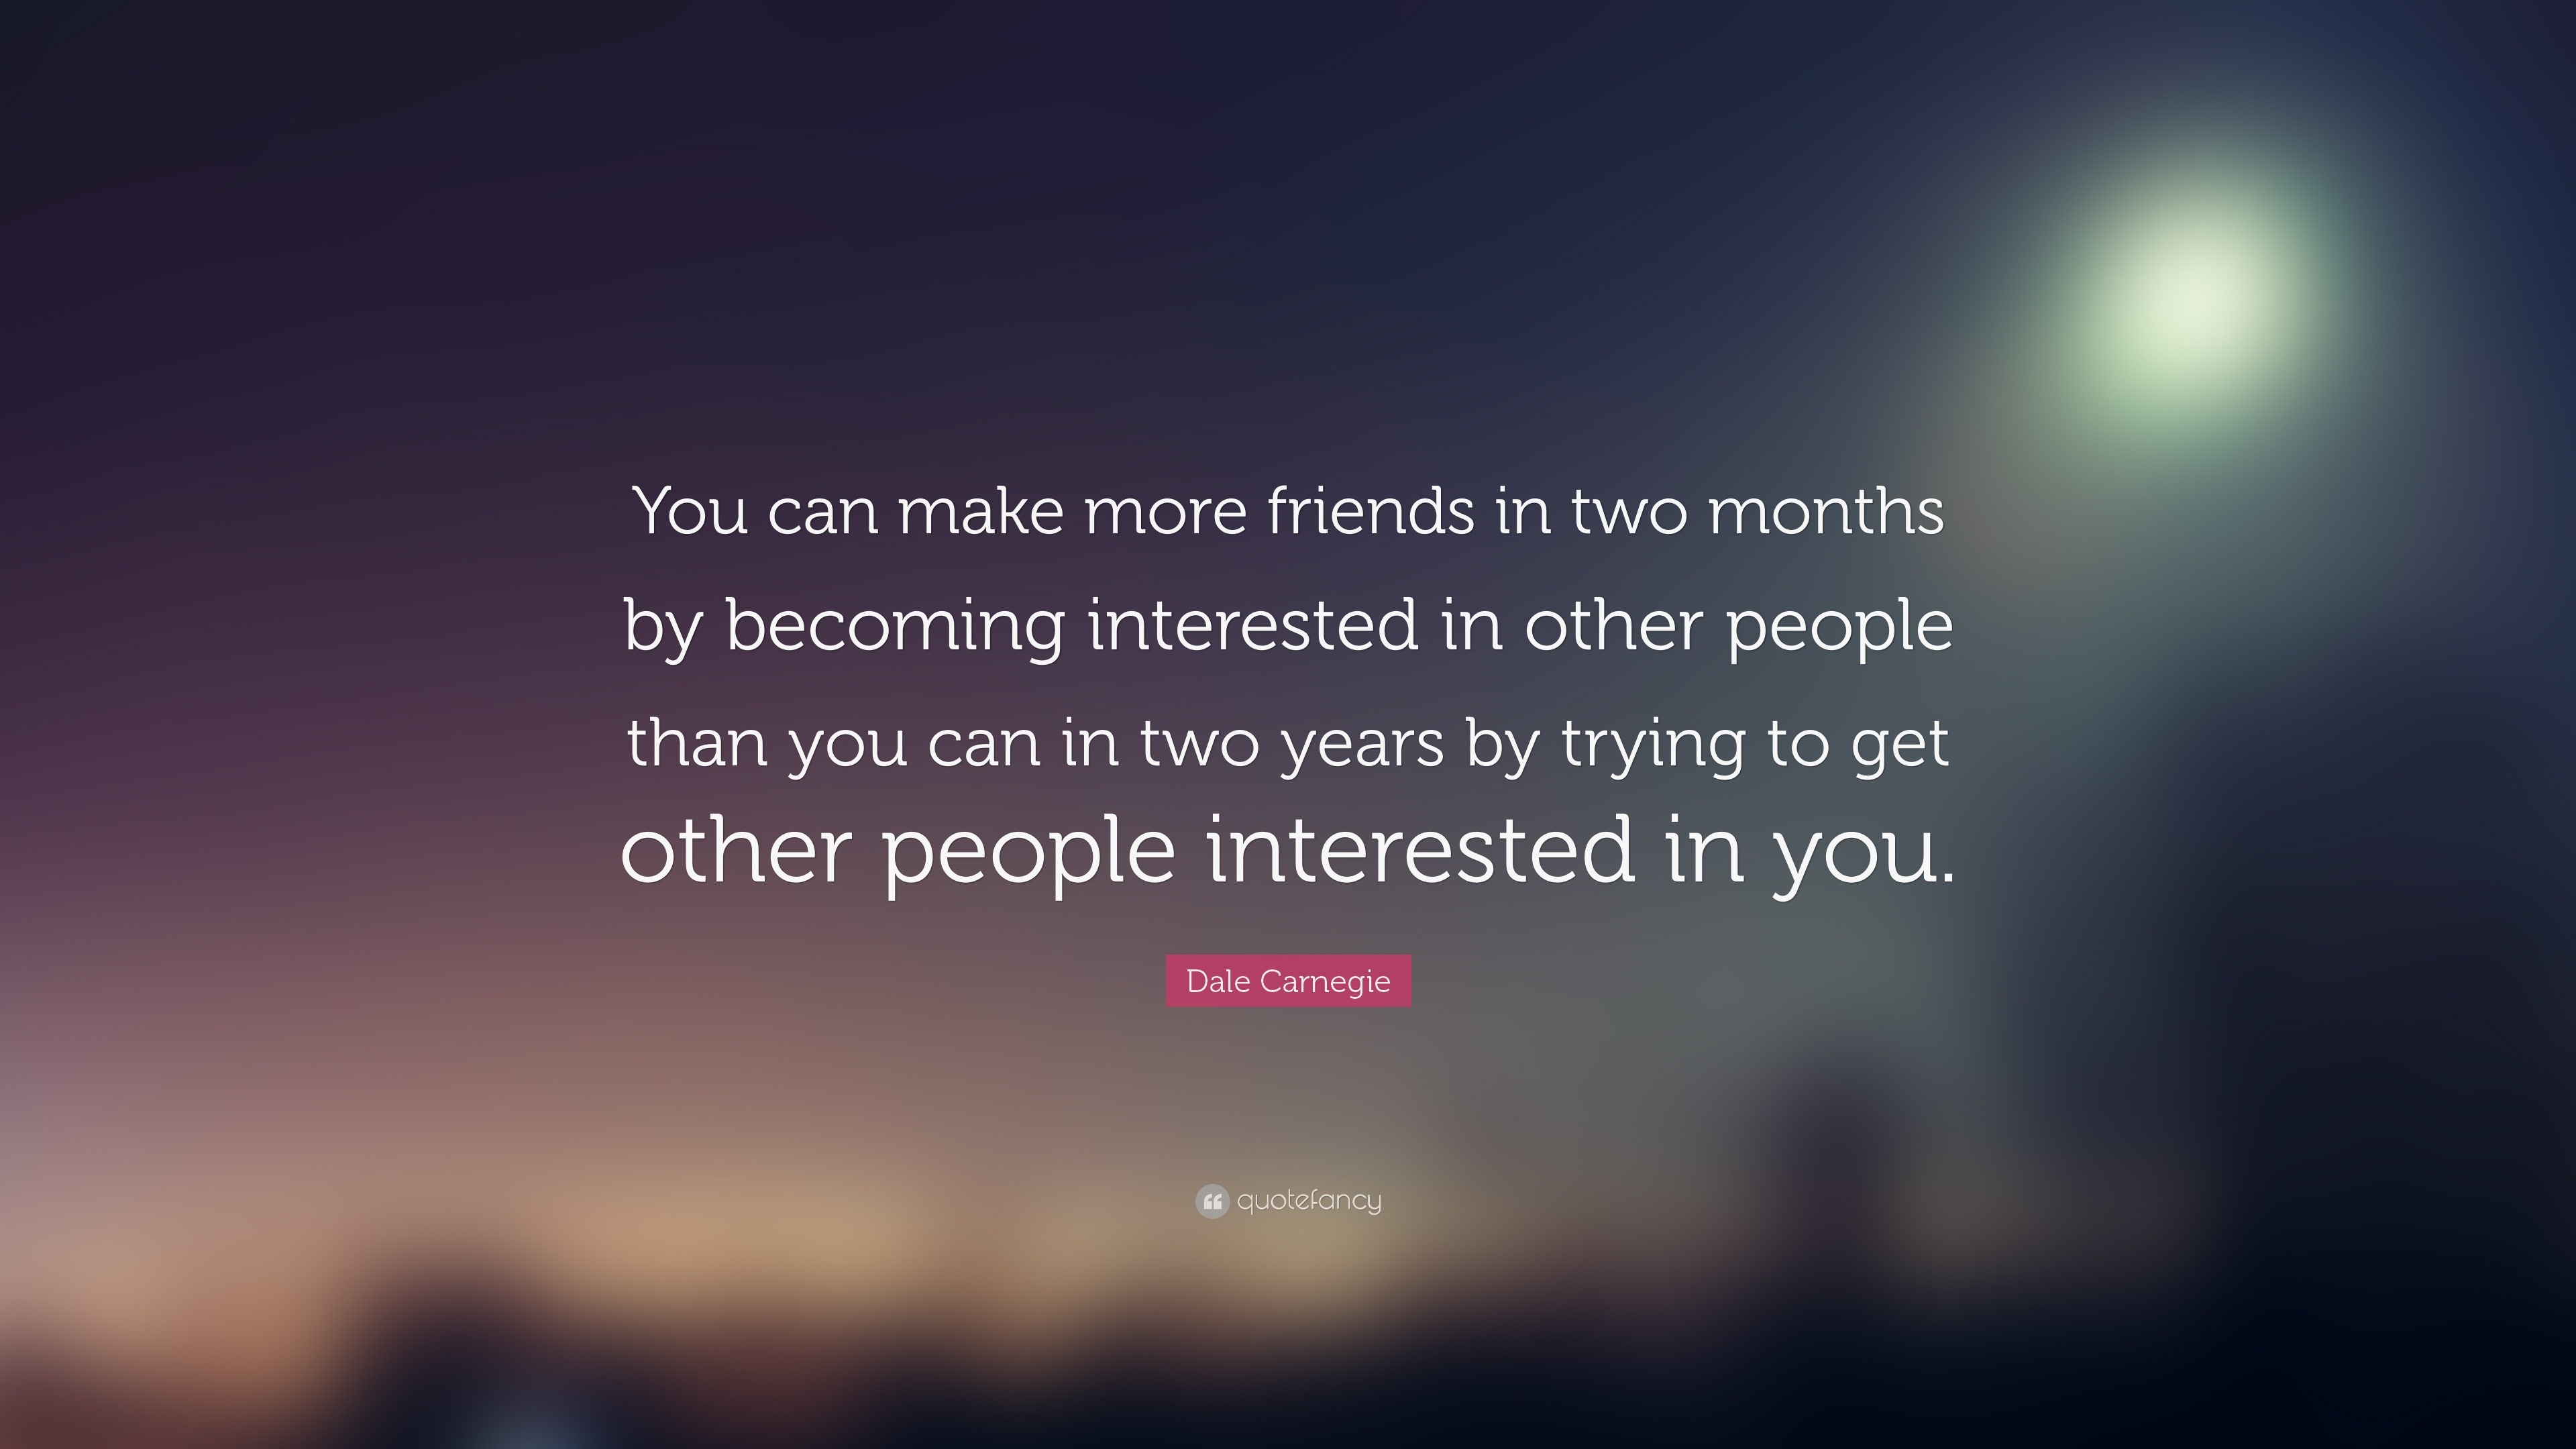 Dale Carnegie Quote You Can Make More Friends In Two Months By Becoming Interested In Other People Than You Can In Two Years By Trying To Ge 14 Wallpapers Quotefancy